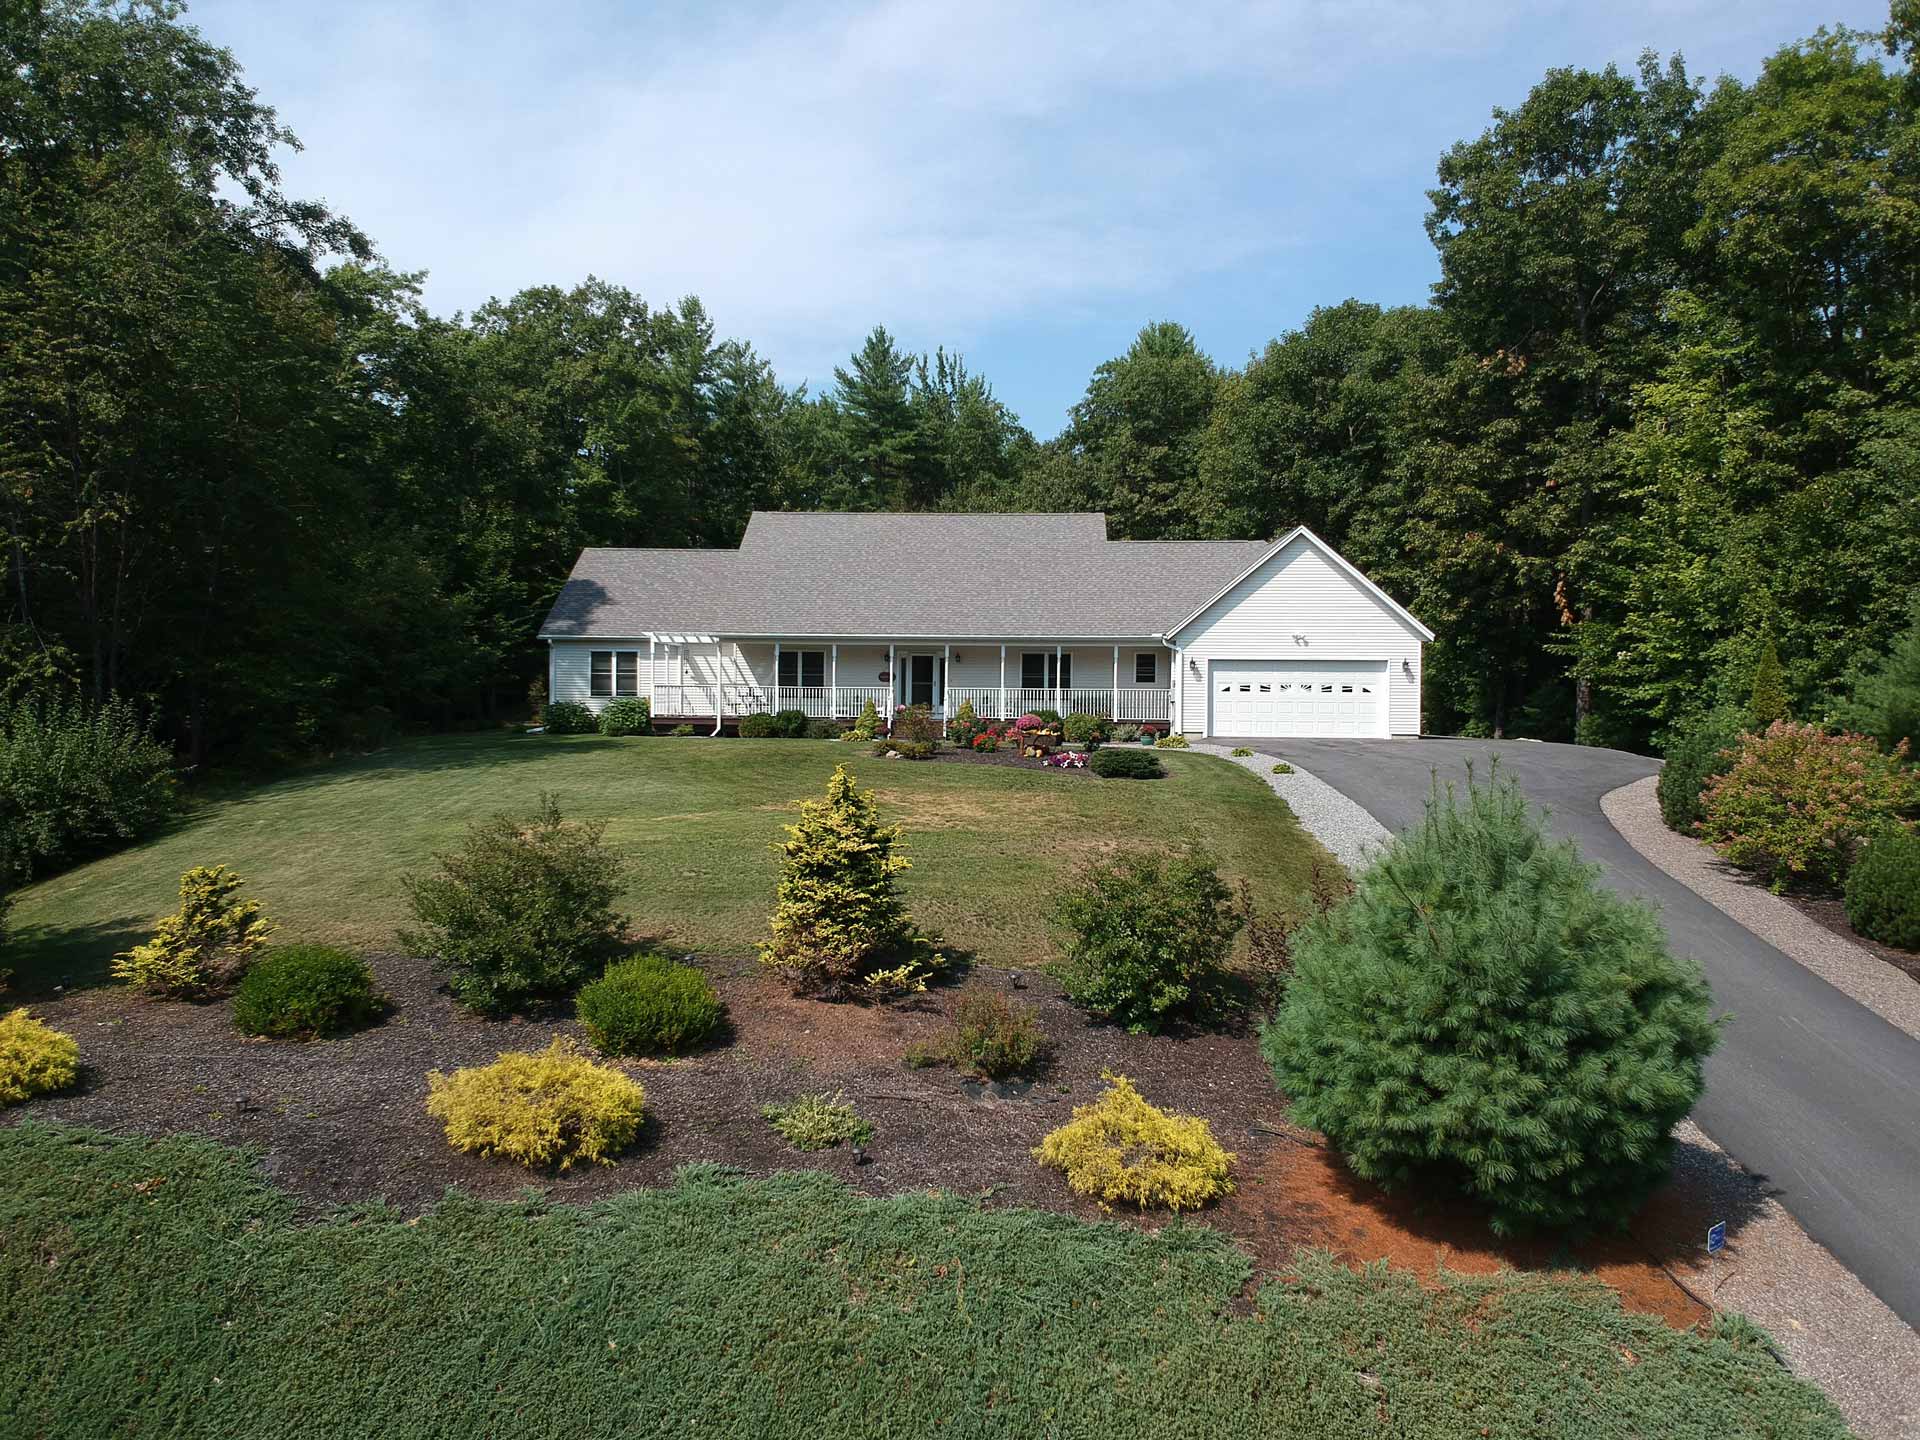 Aerial shot of house with a well-landscaped yard and asphalt driveway